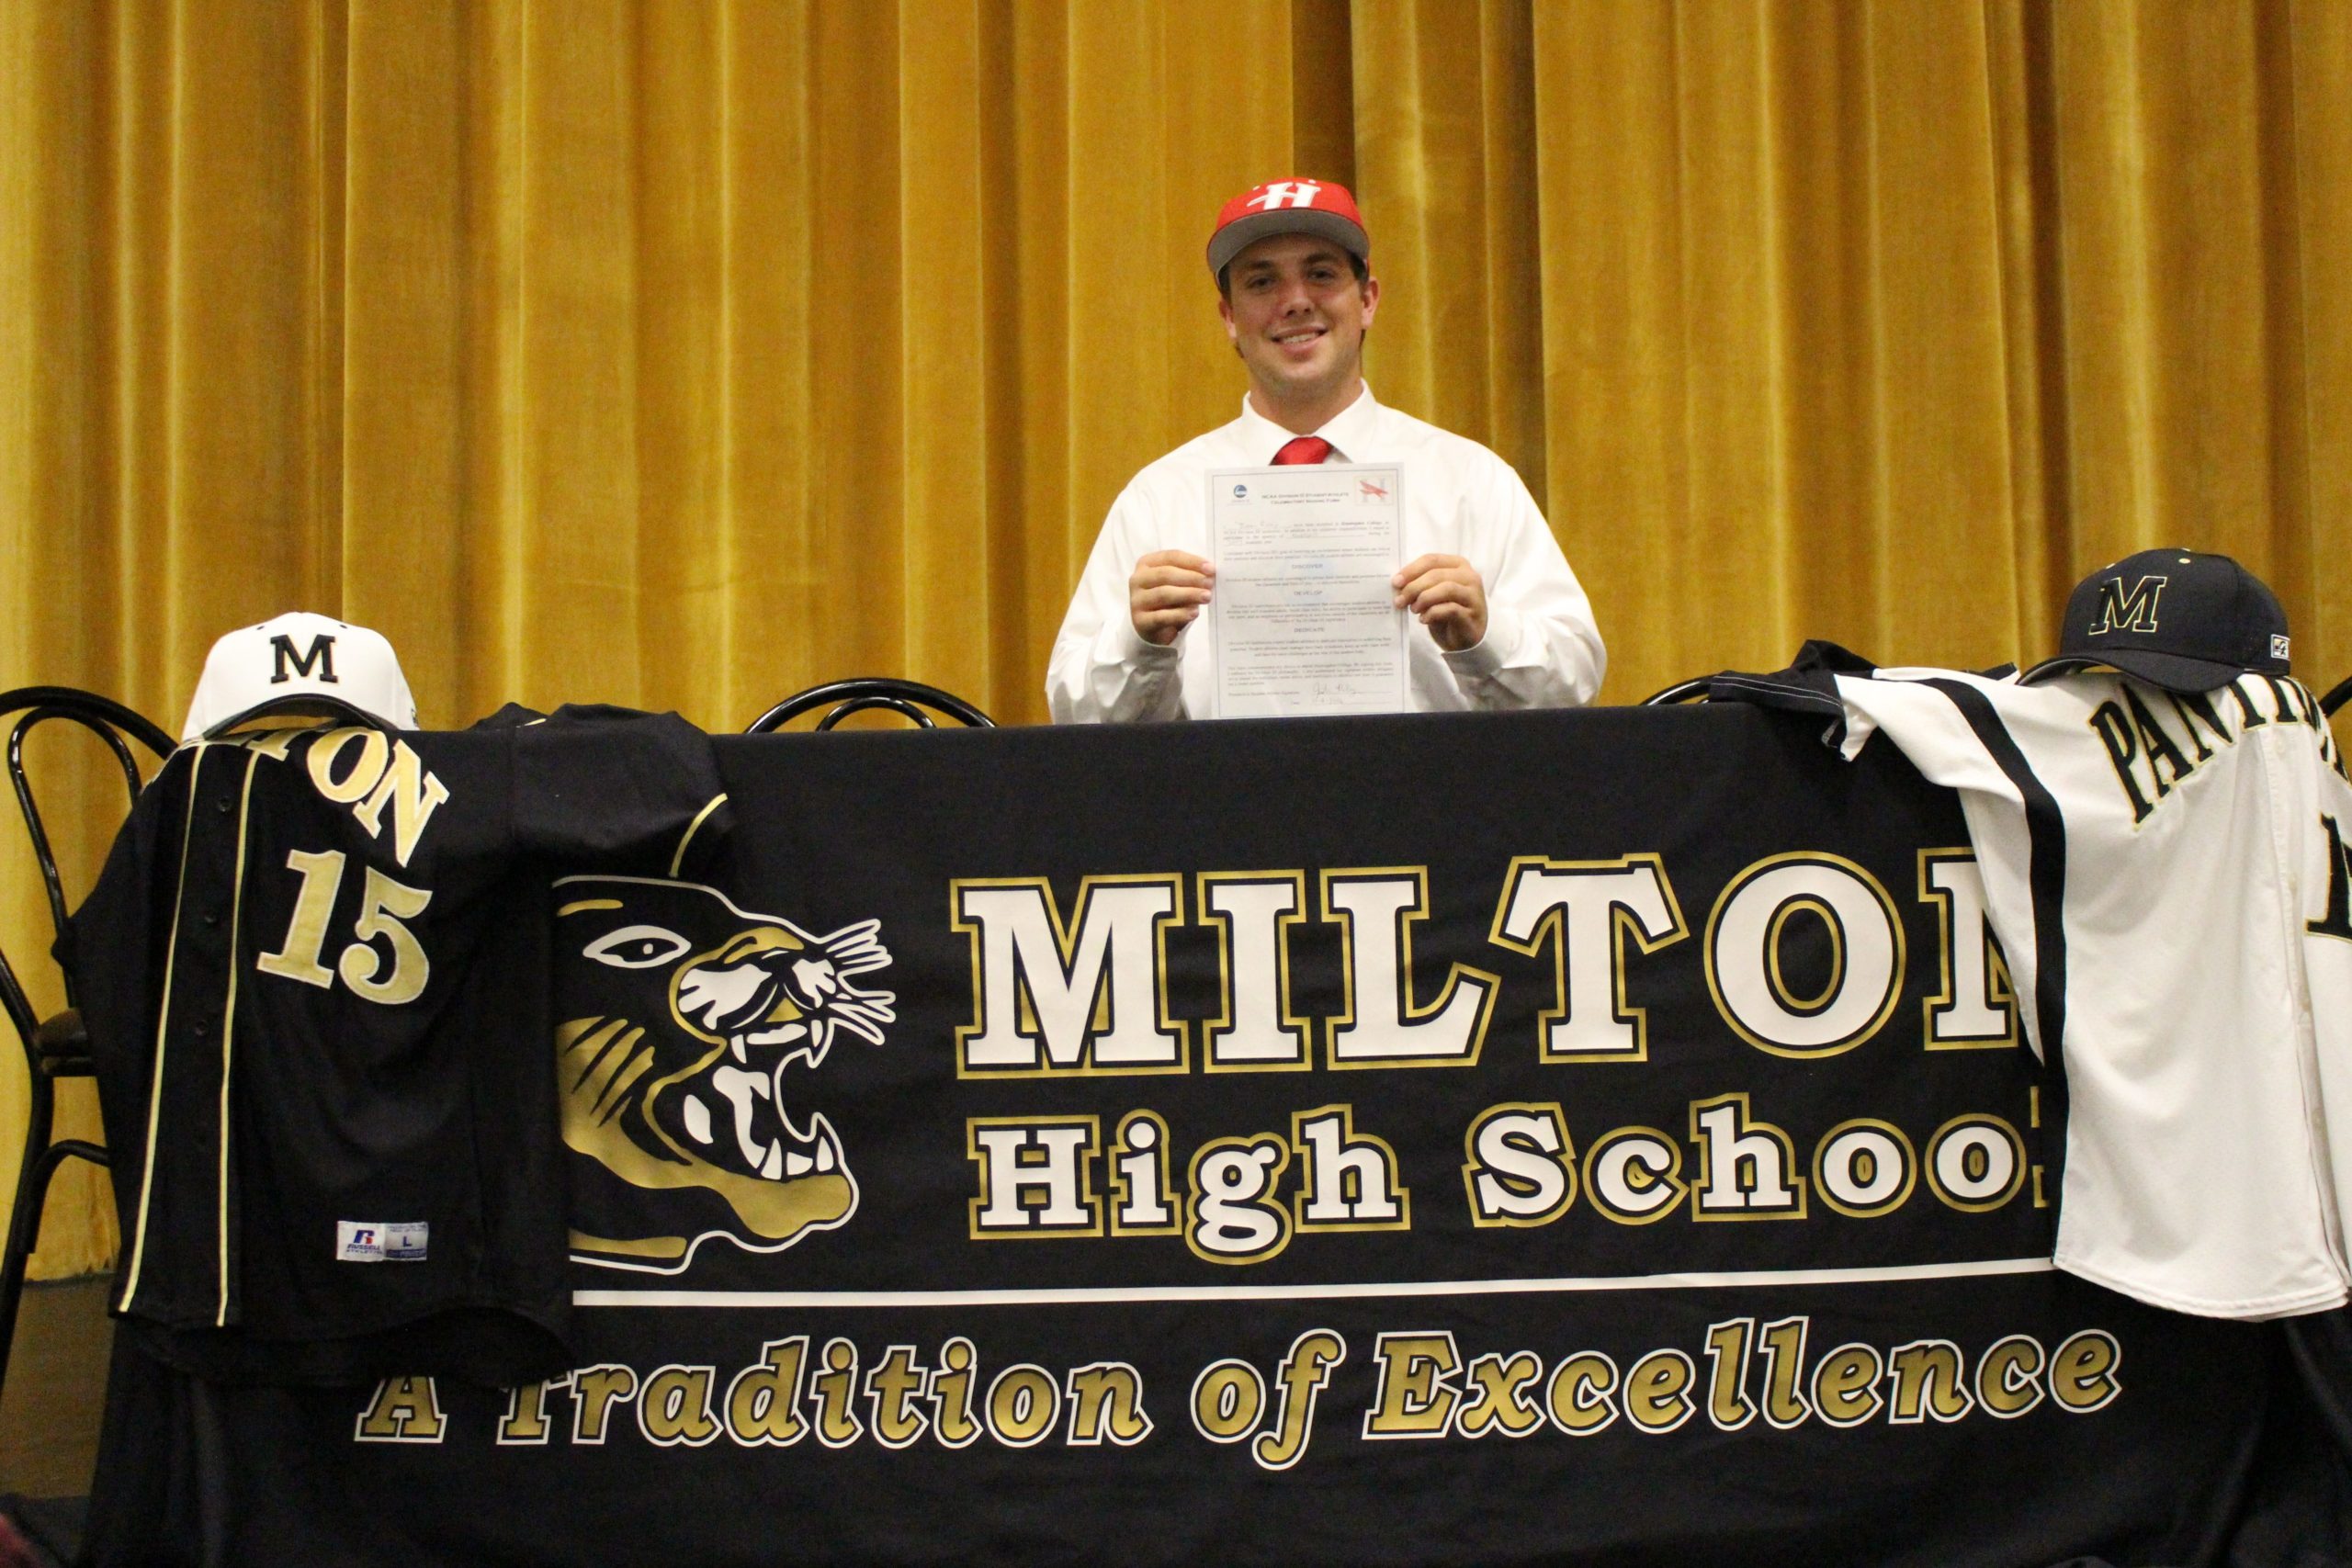 Justin Raley of Milton High School celebrates signing a baseball scholarship with Huntingdon College in Montgomery, Ala., on Nov. 16. (Special to the Press Gazette)